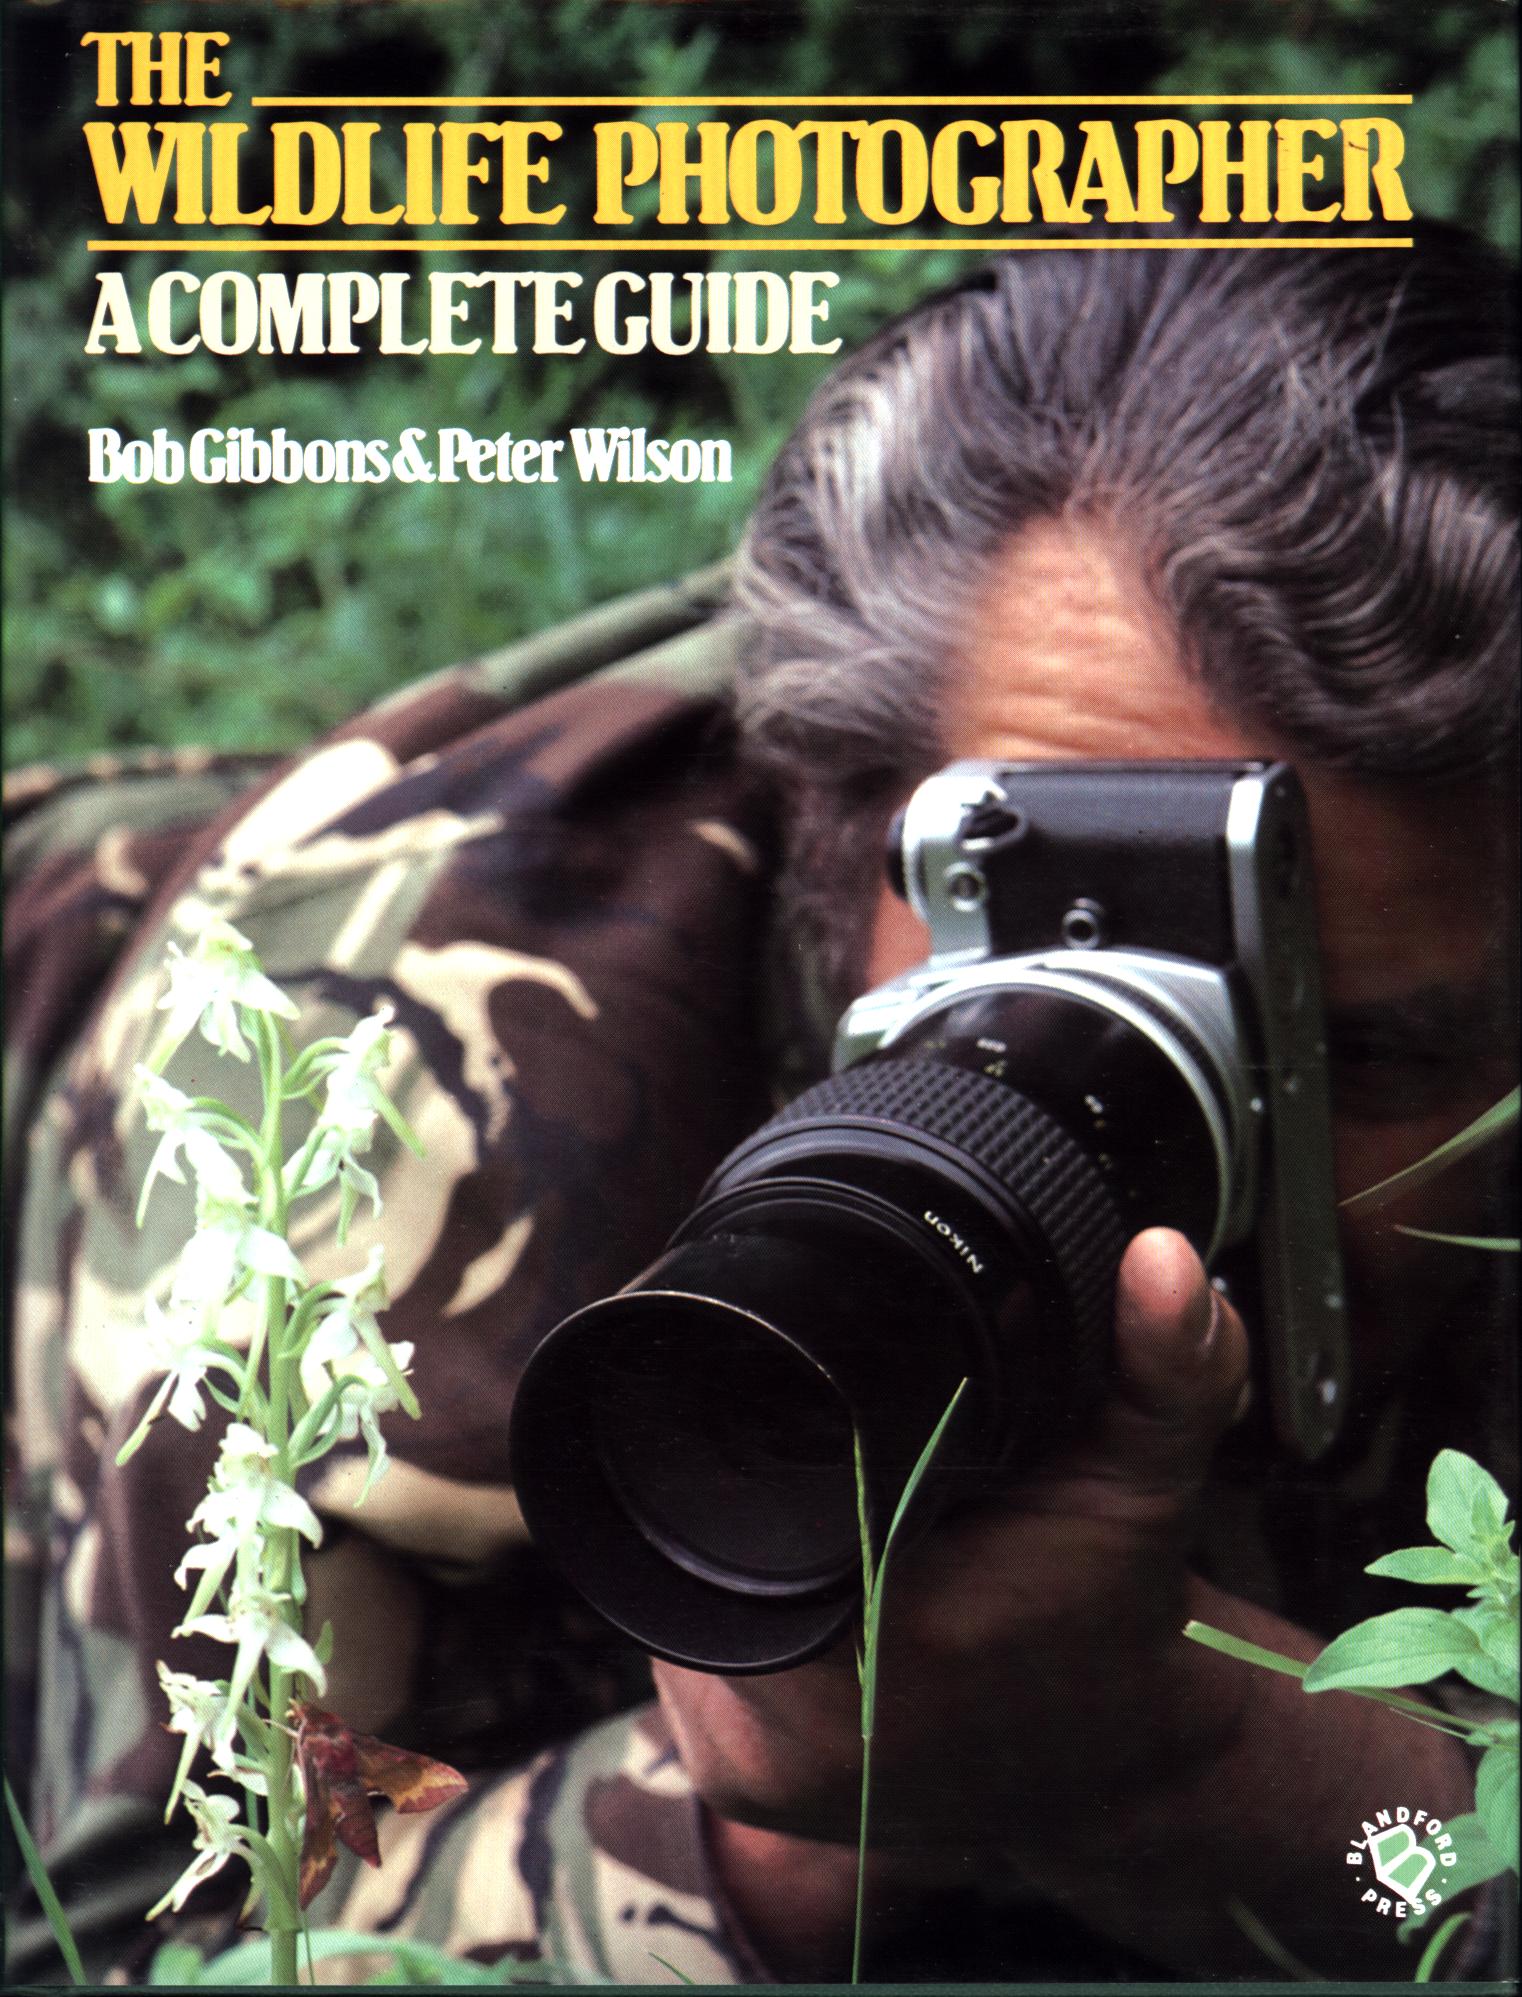 THE WILDLIFE PHOTOGRAPHER: a complete guide